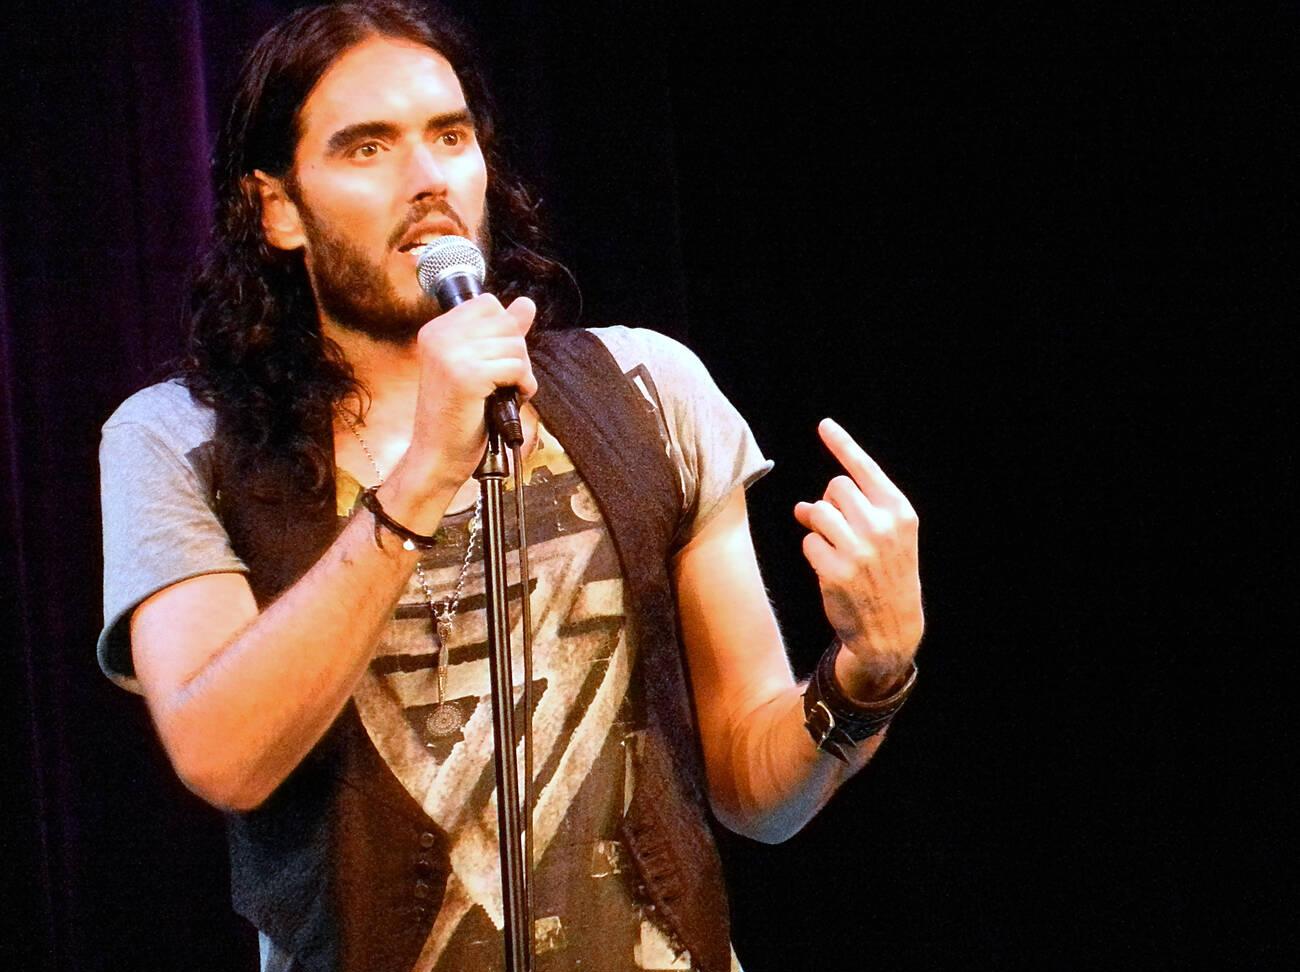 russell brand performing on stage